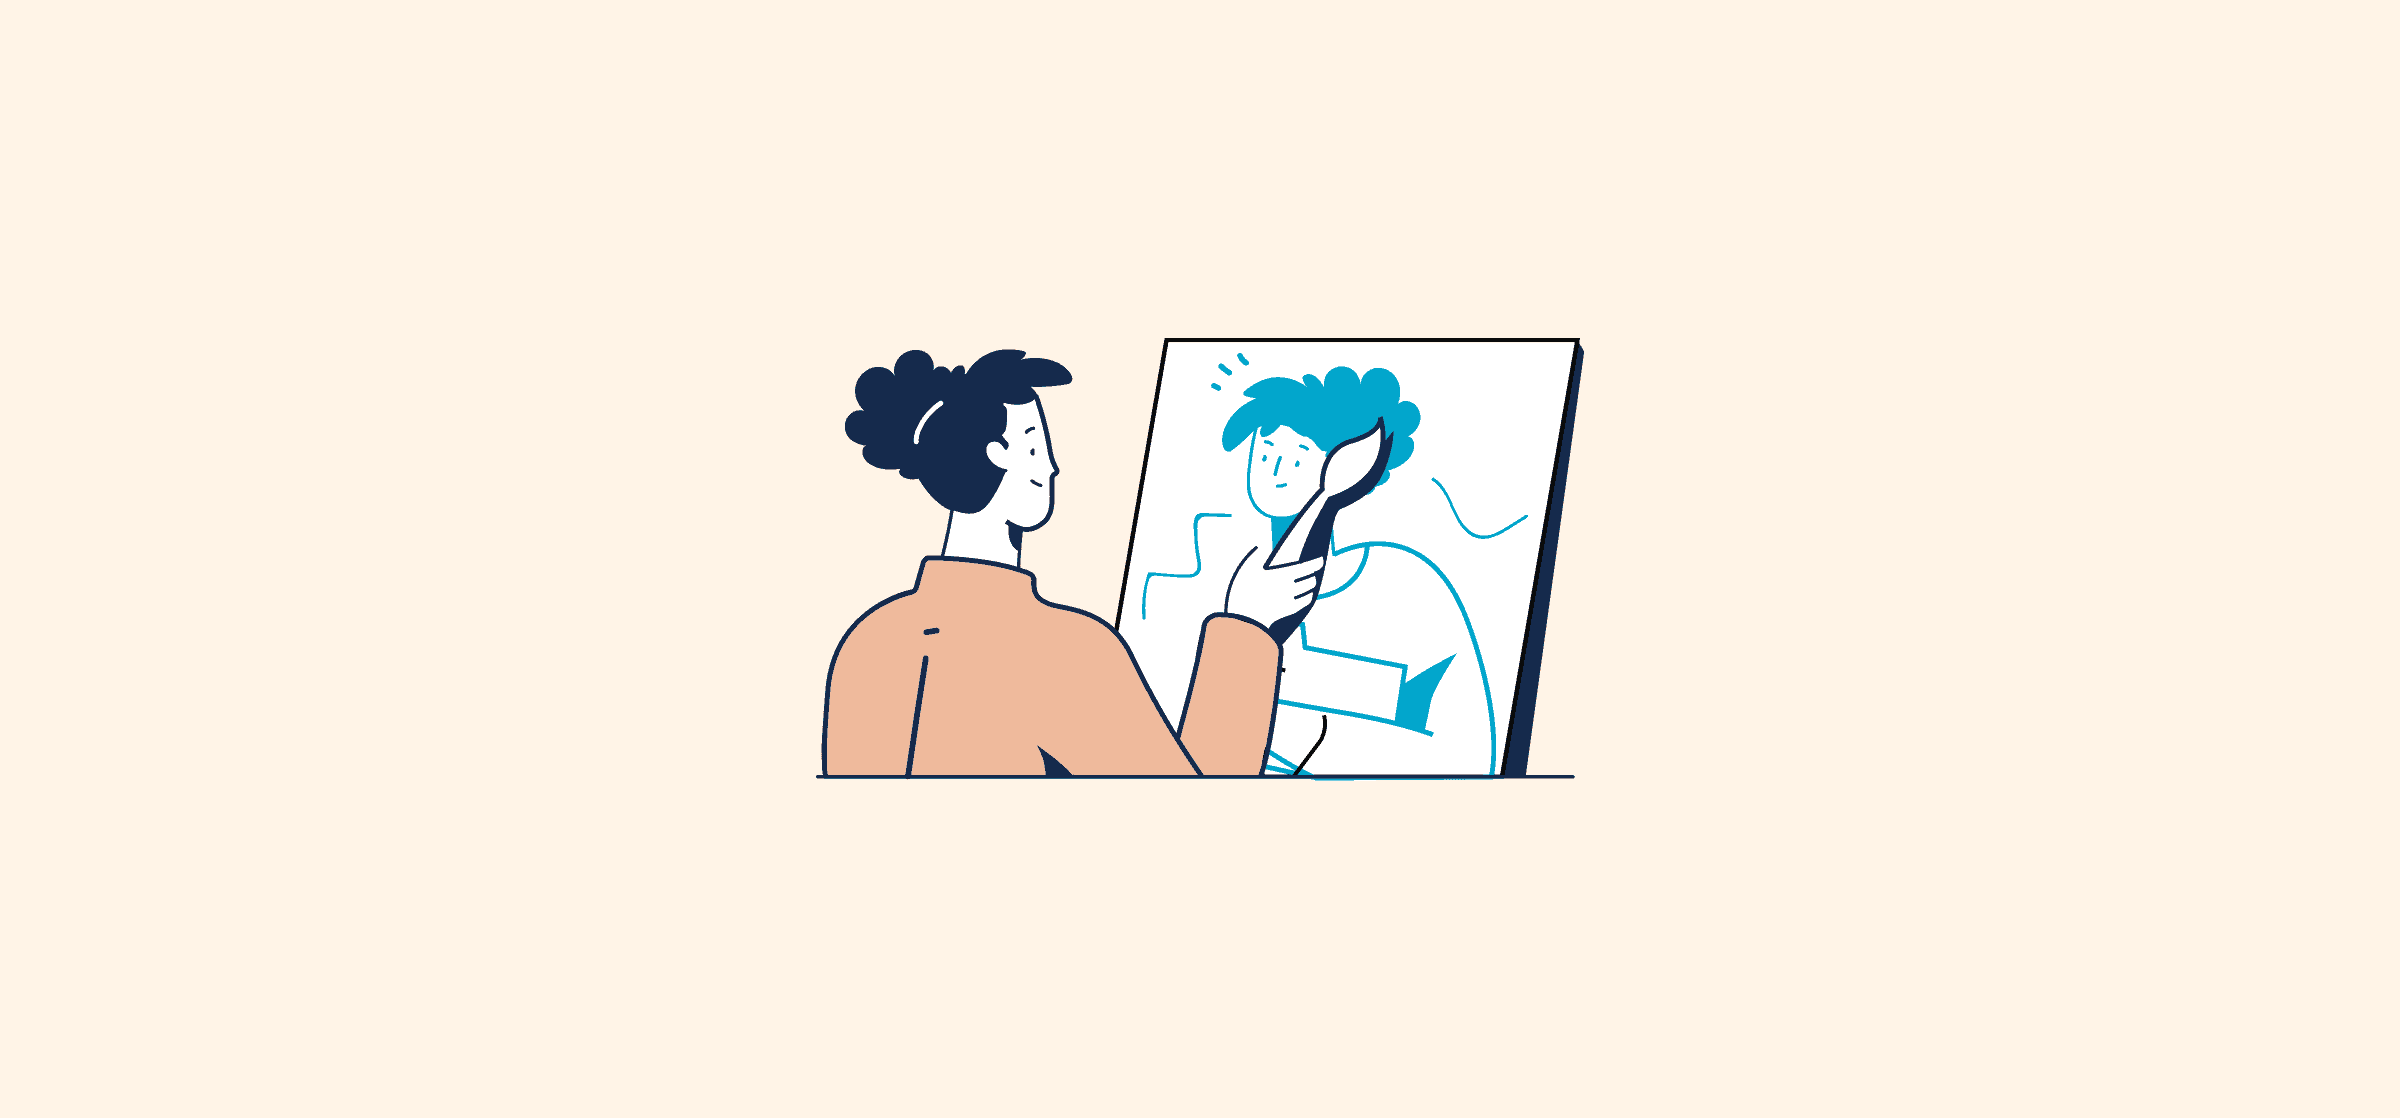 A person painting a self-portrait, representing the project management process.